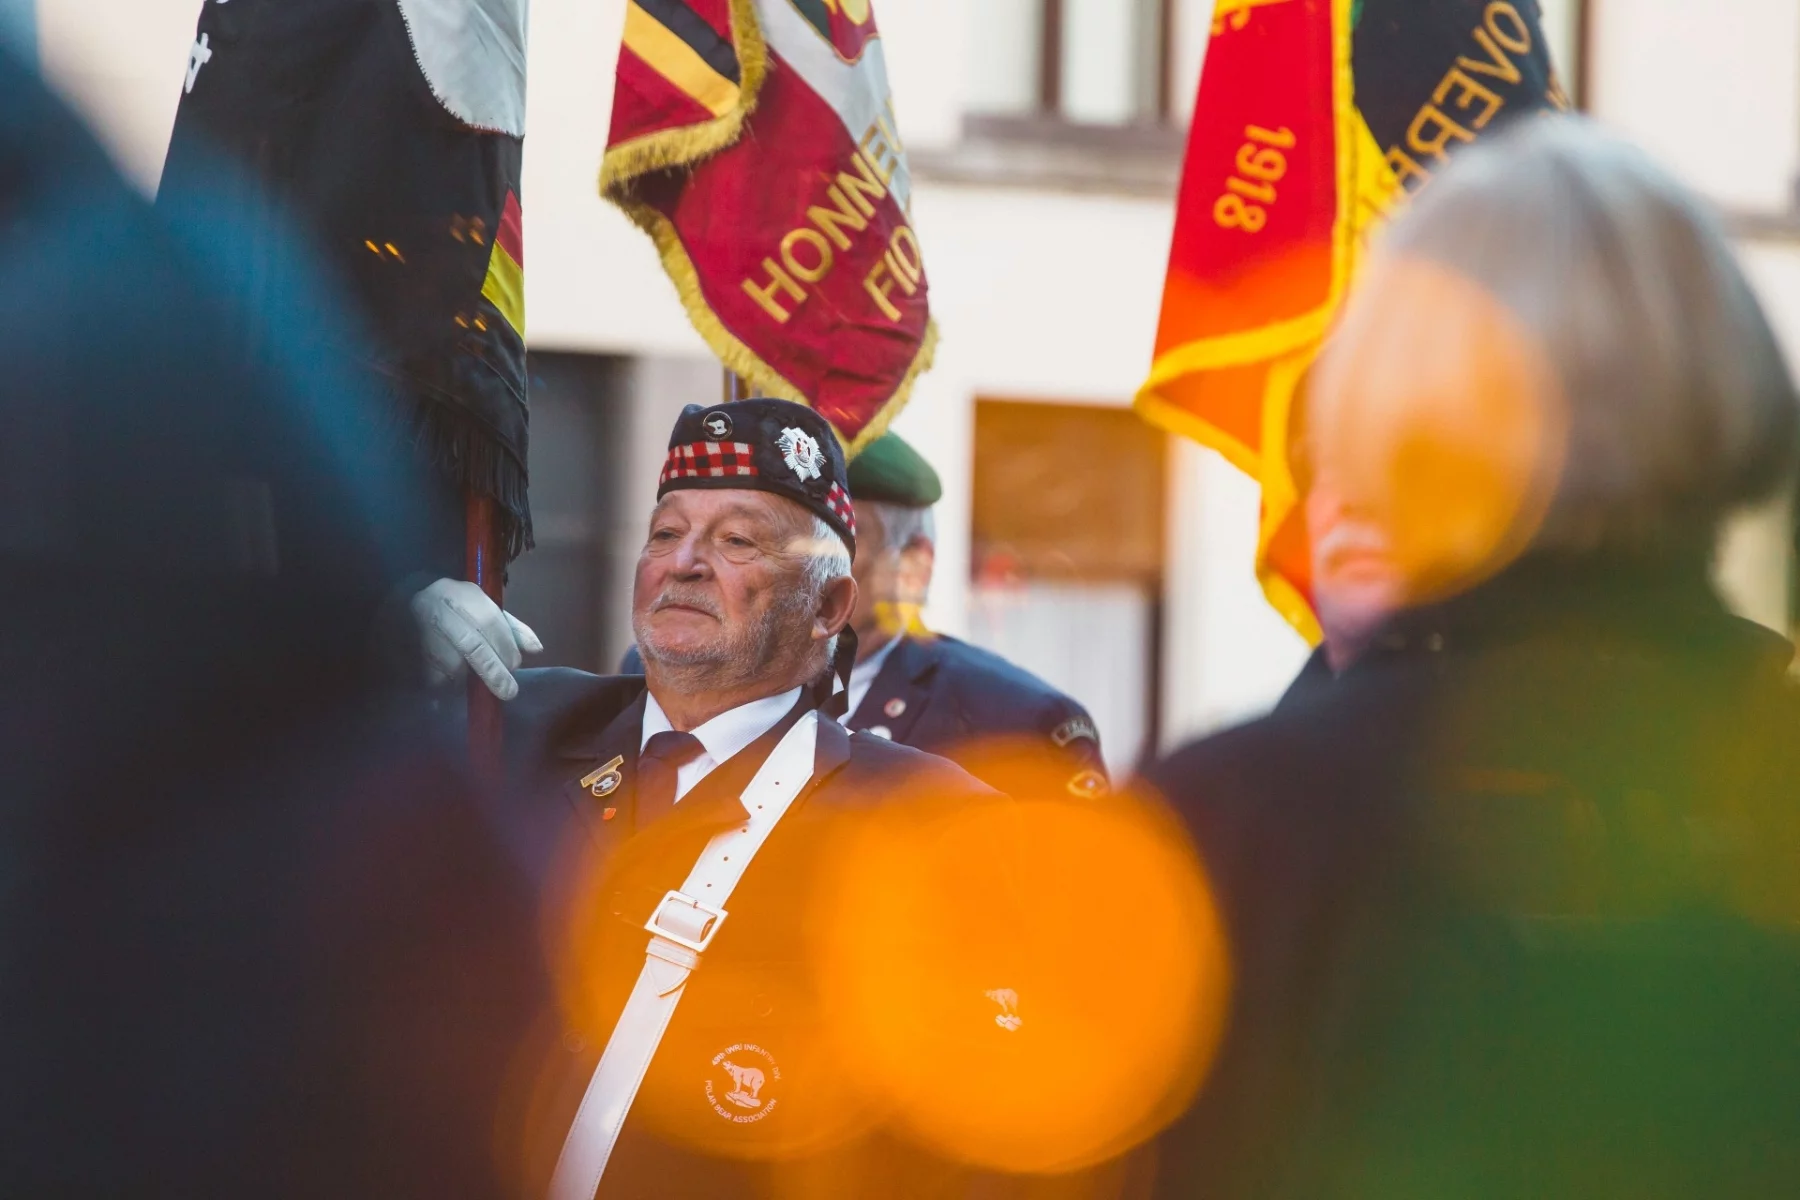 Old man in uniform holding a banner in Antwerp. He is part of the British 49th West-Riding Infantry Division Polar Bear Association.